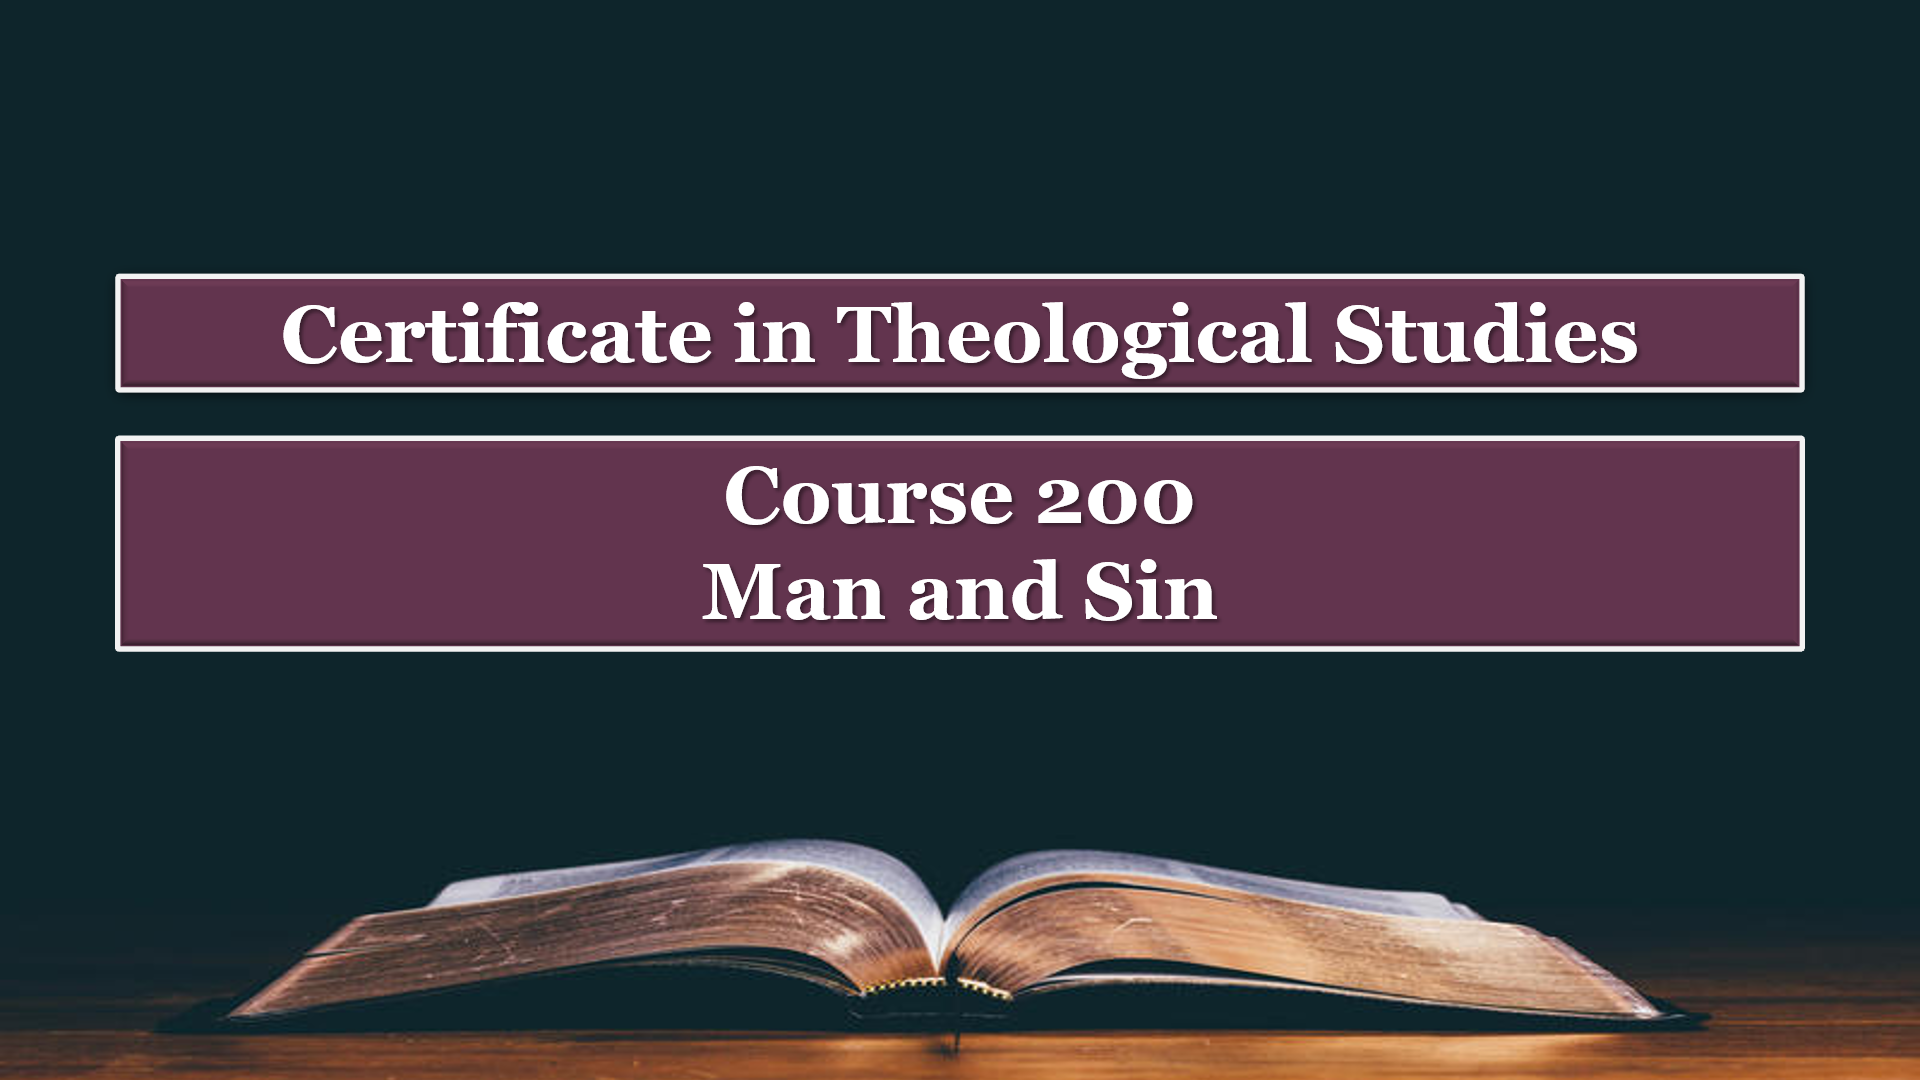 Course 200: Man and Sin